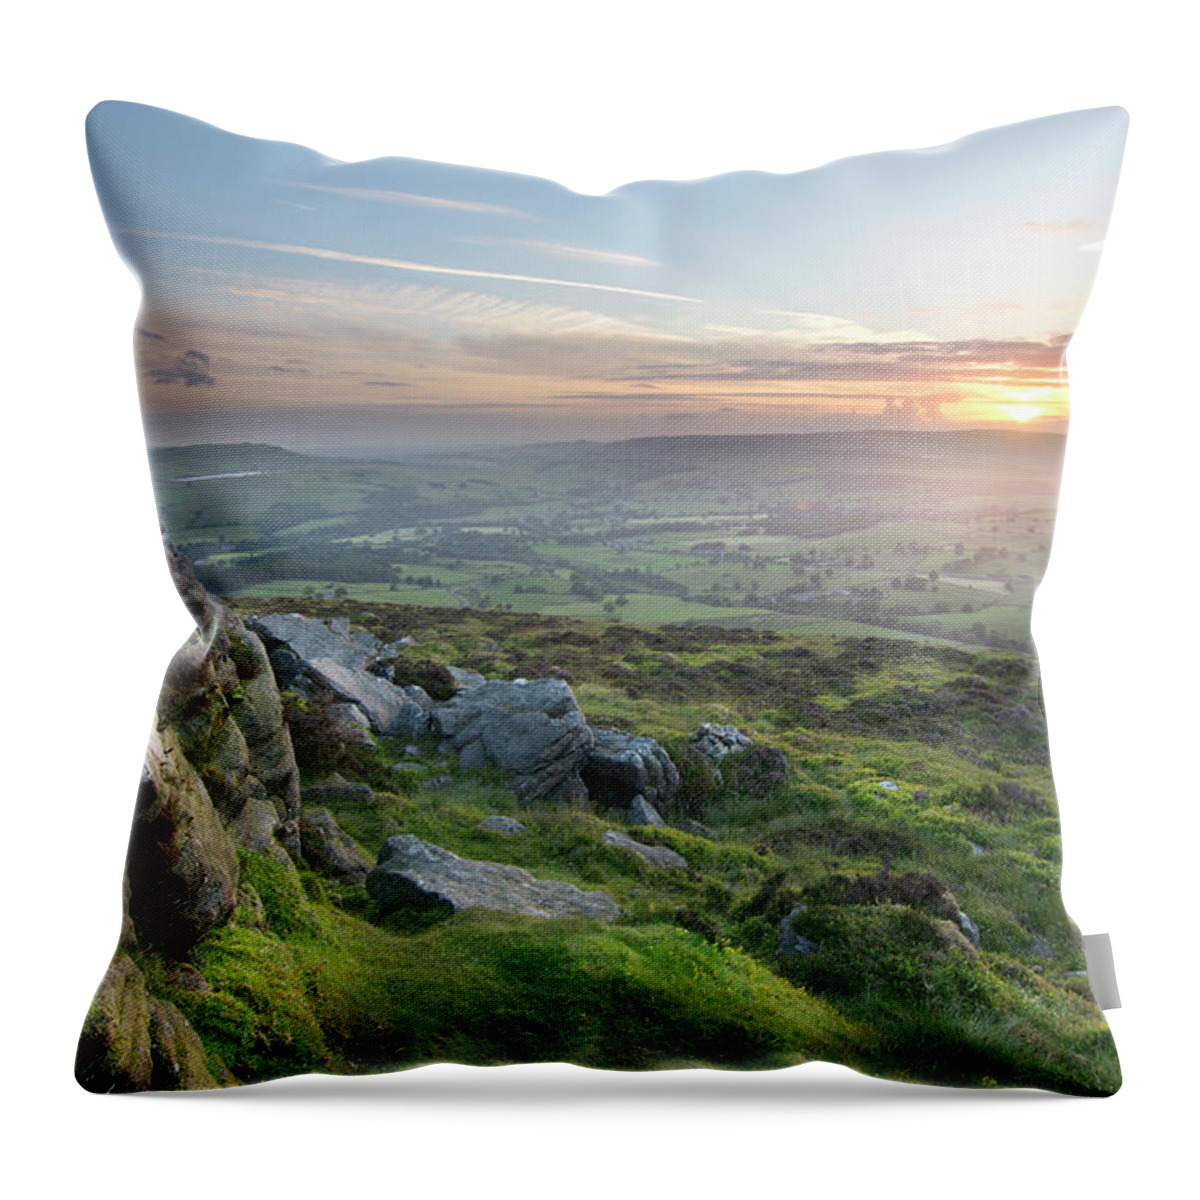 Scenics Throw Pillow featuring the photograph Beamsley Sunset by Terry Roberts Photography